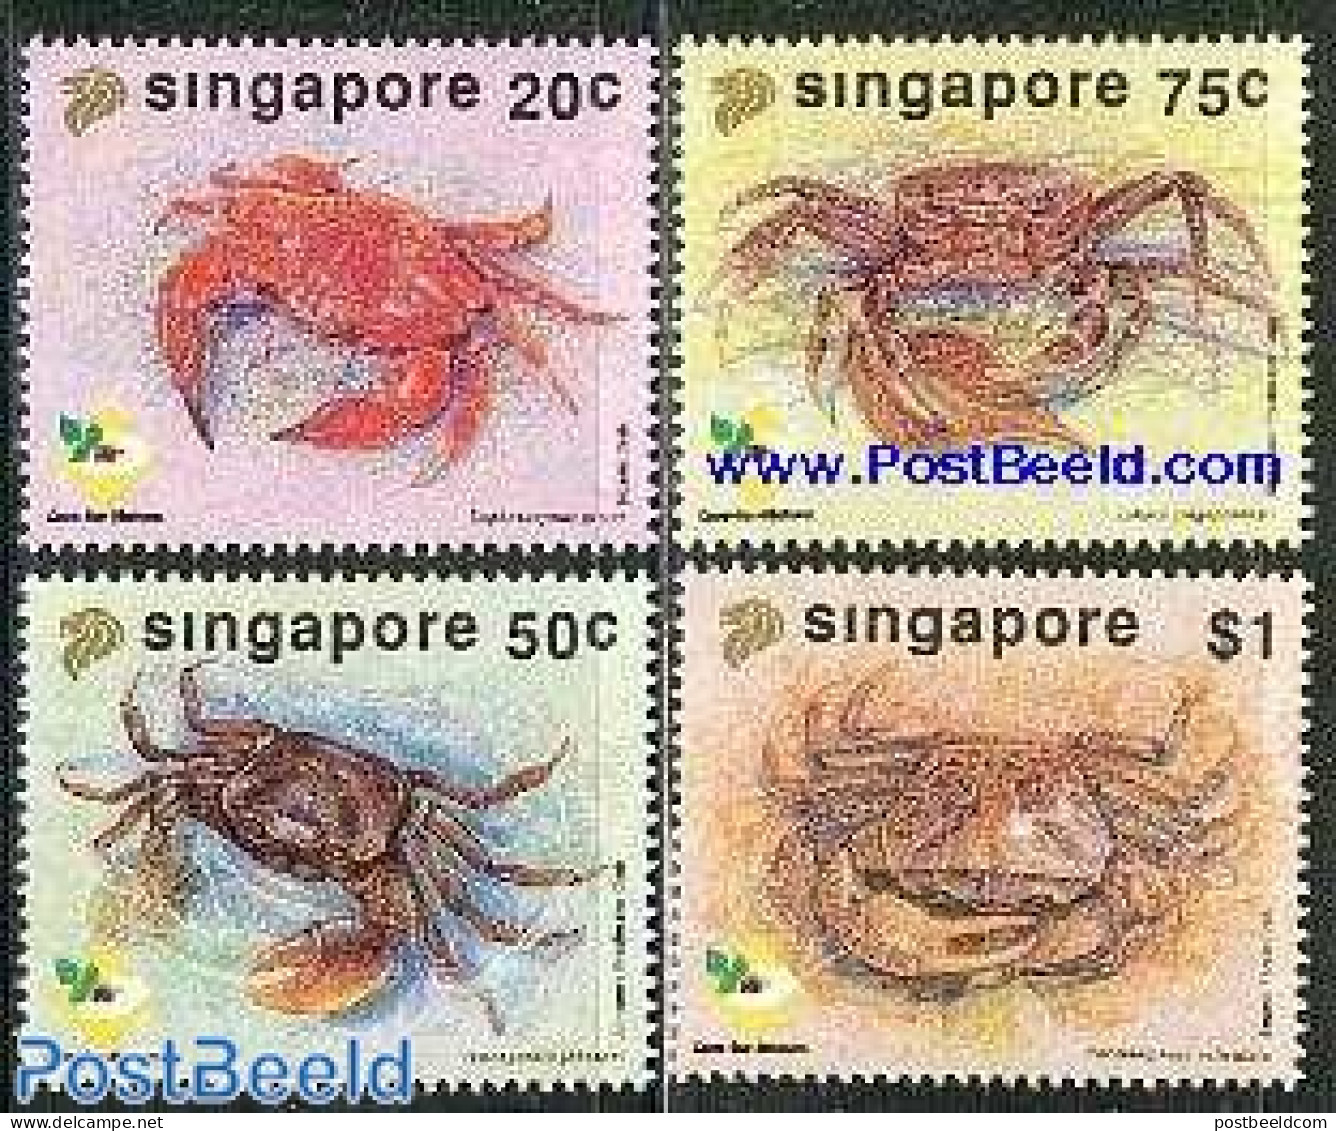 Singapore 1992 Crabs 4v, Mint NH, Nature - Shells & Crustaceans - Crabs And Lobsters - Marine Life